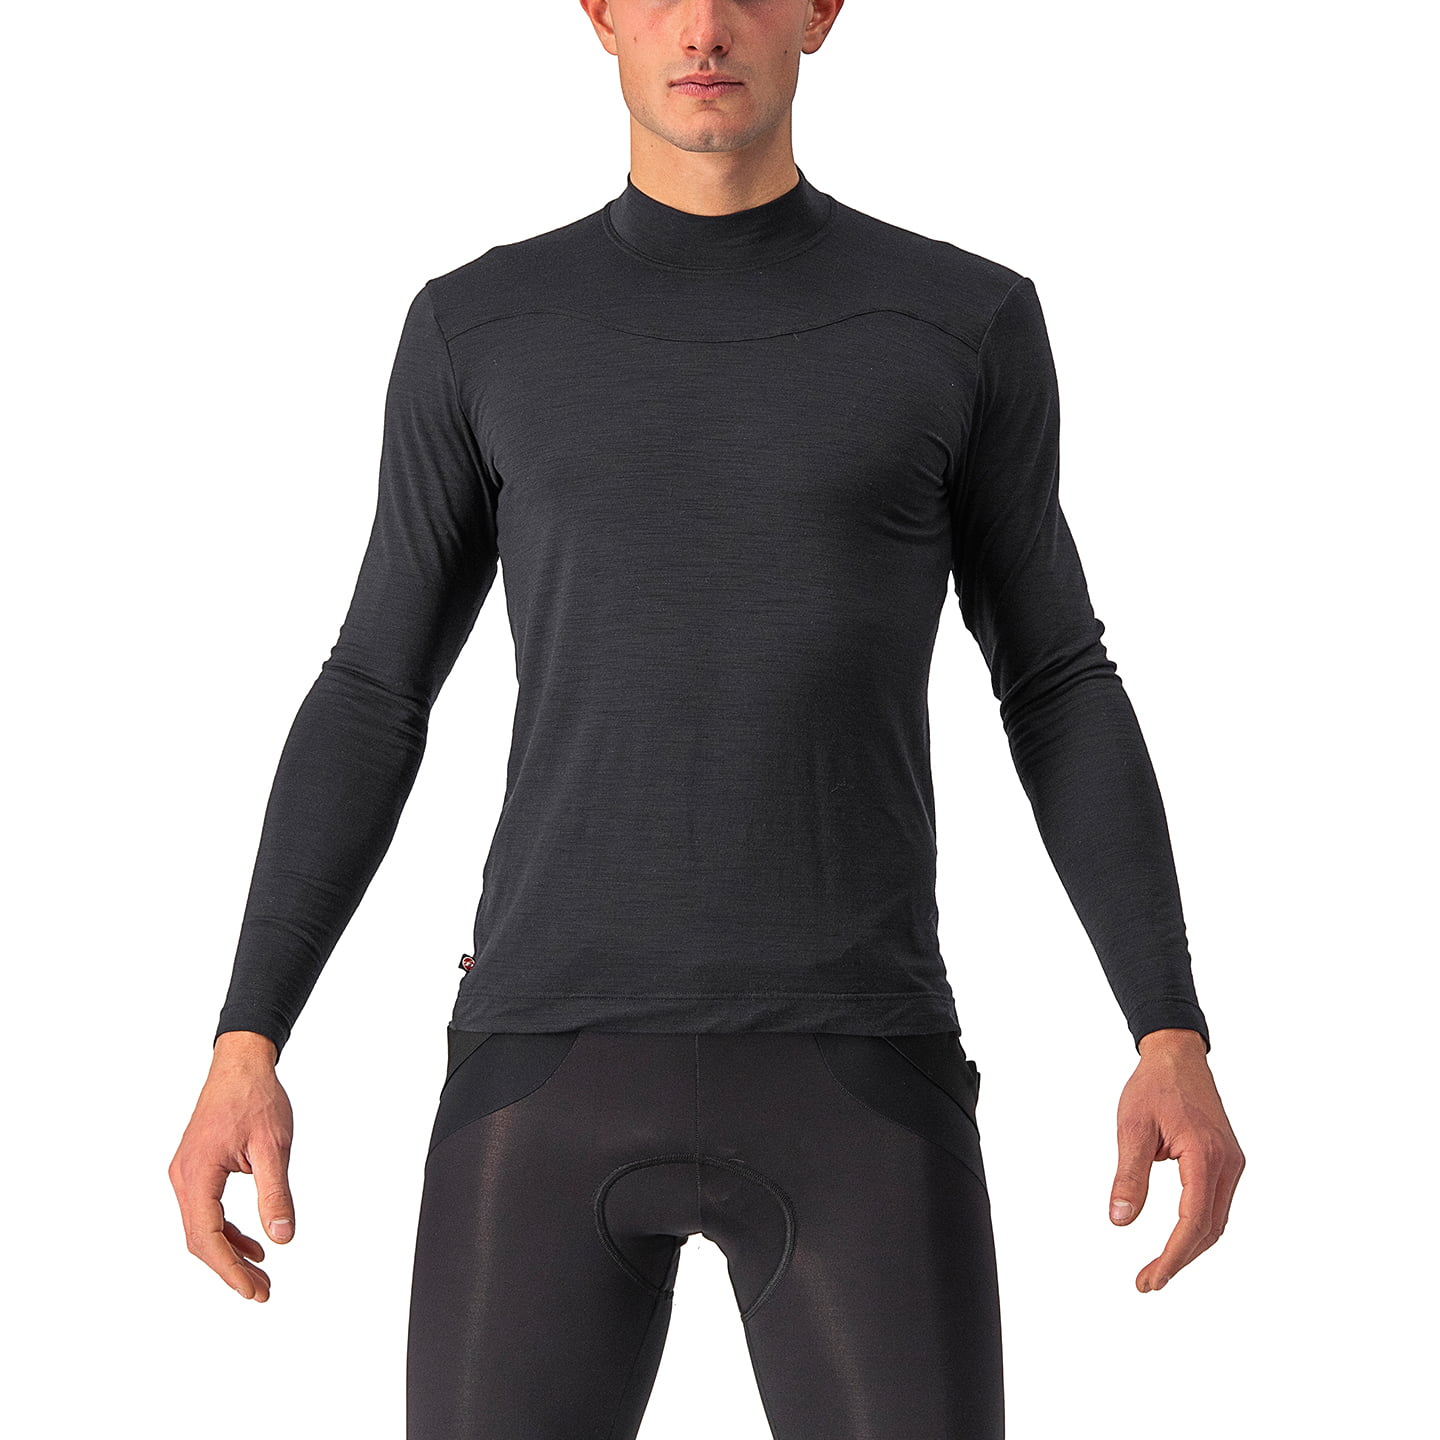 CASTELLI Bandito Long Sleeve Cycling Base Layer Base Layer, for men, size S